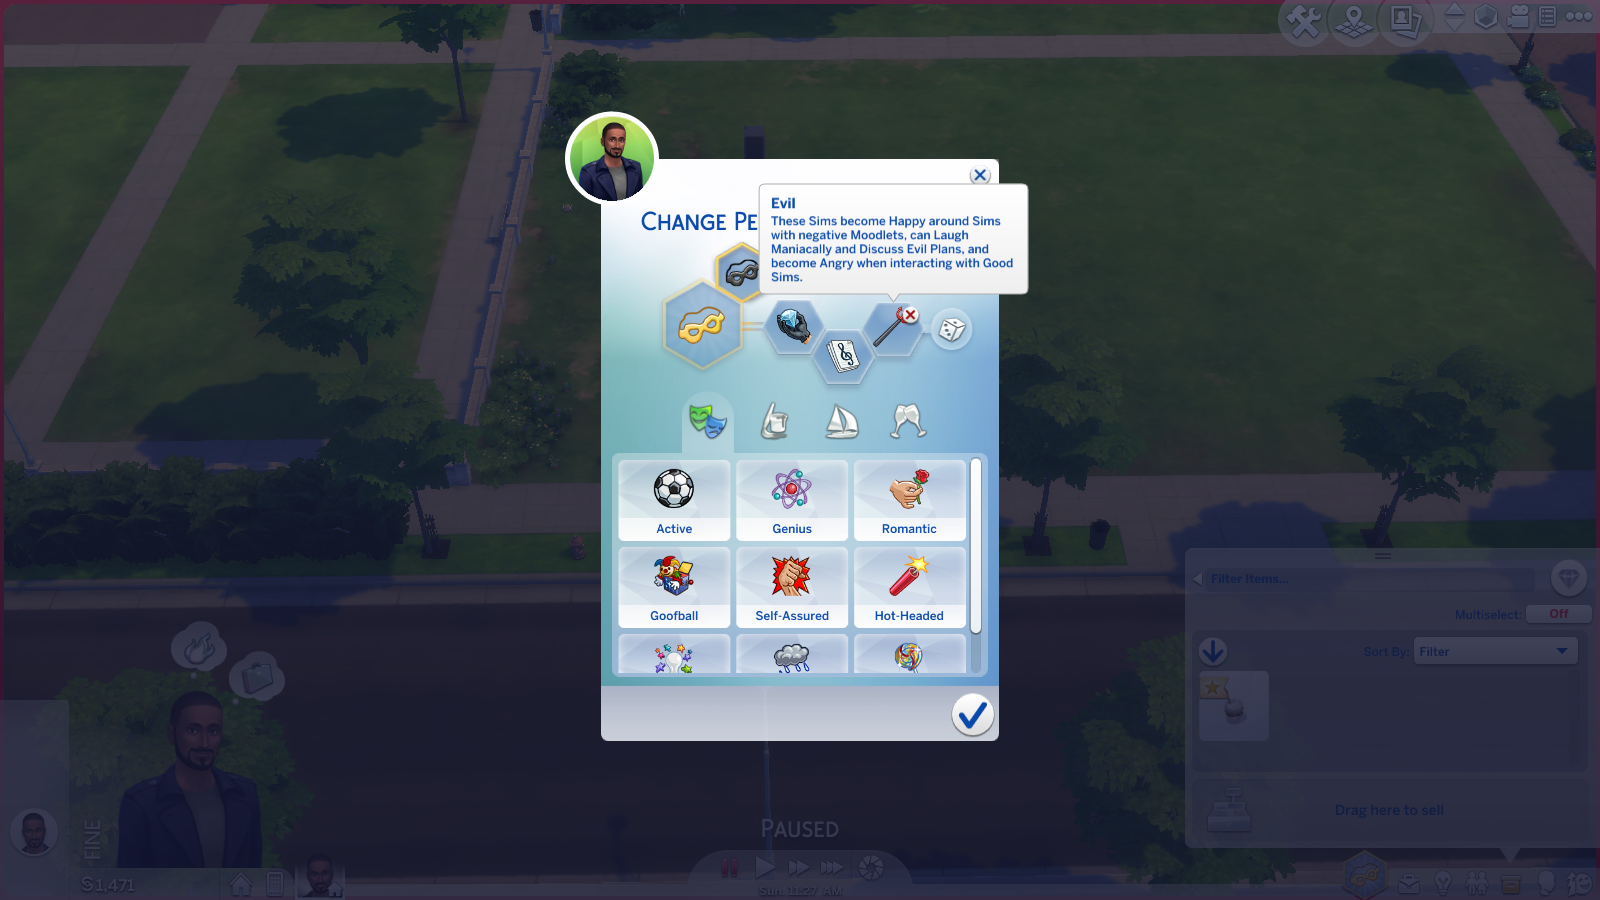 Cheats for The Sims - Microsoft Apps